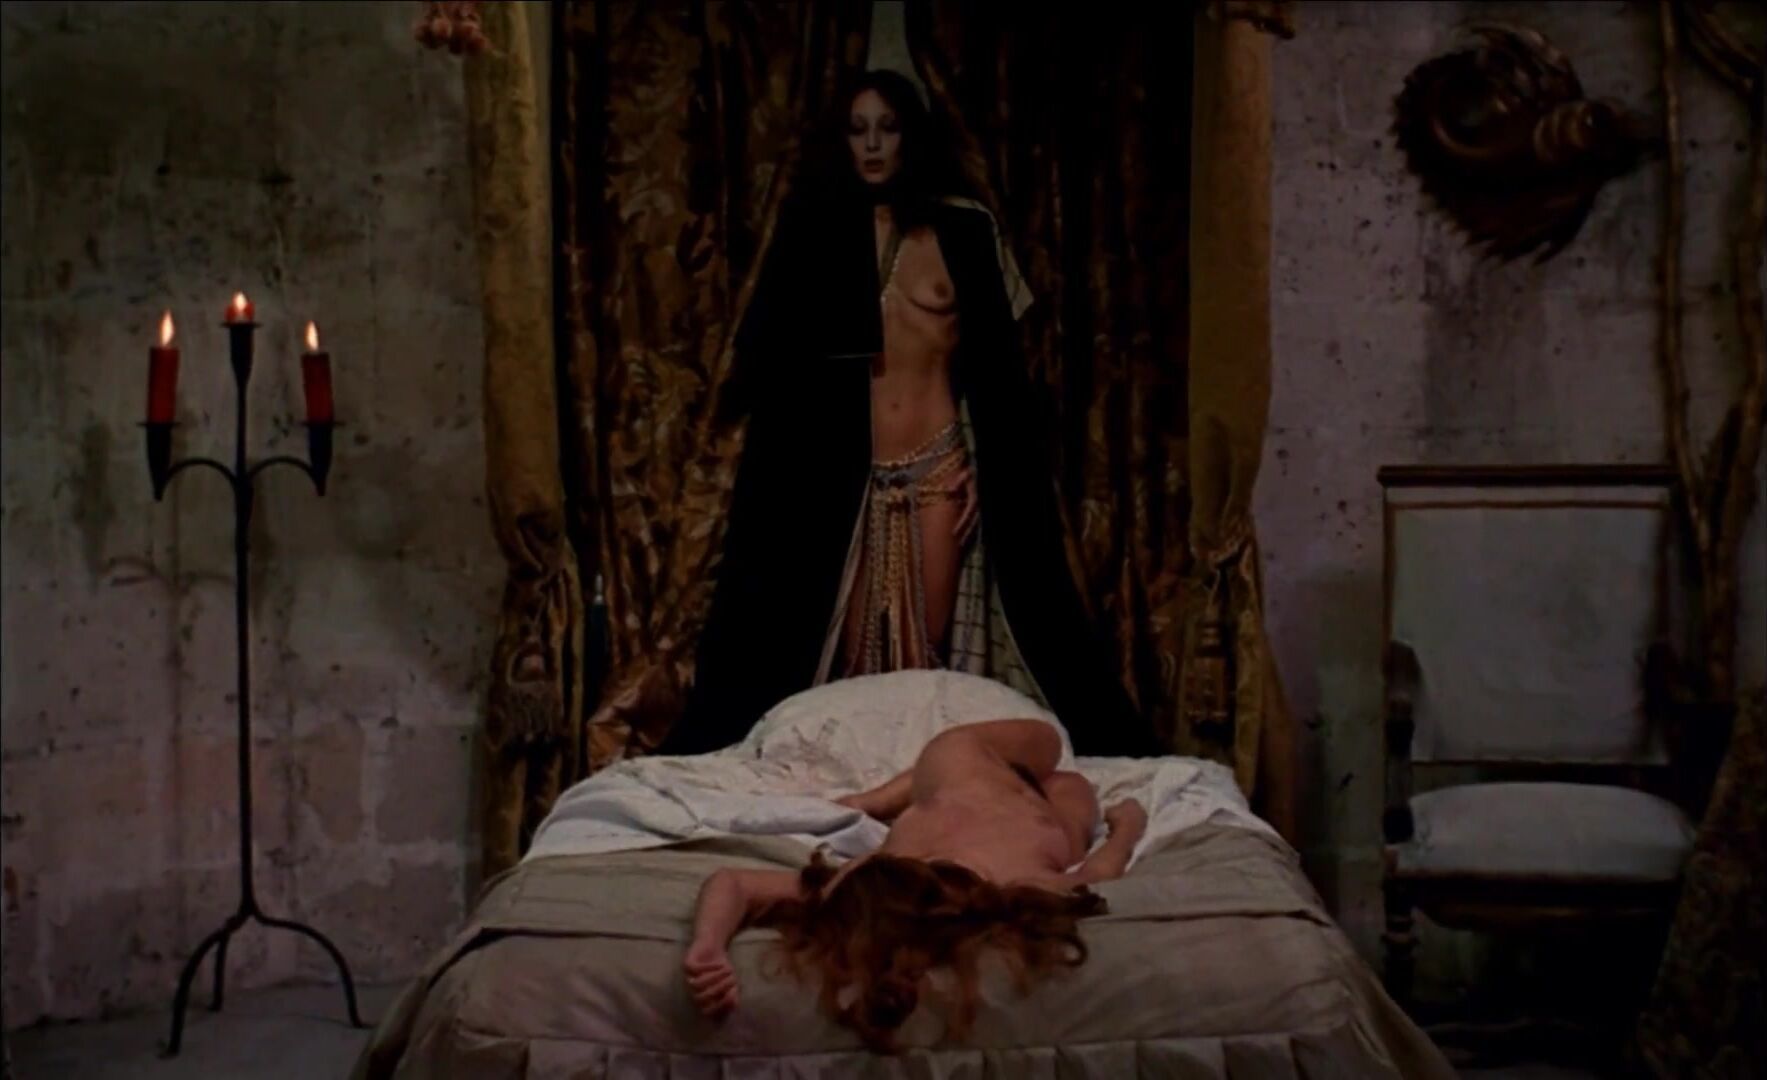 LesbianPornVideos Sandra Julien nude teases in naked excerpts from The Shiver of the Vampires (1971) Orgasm